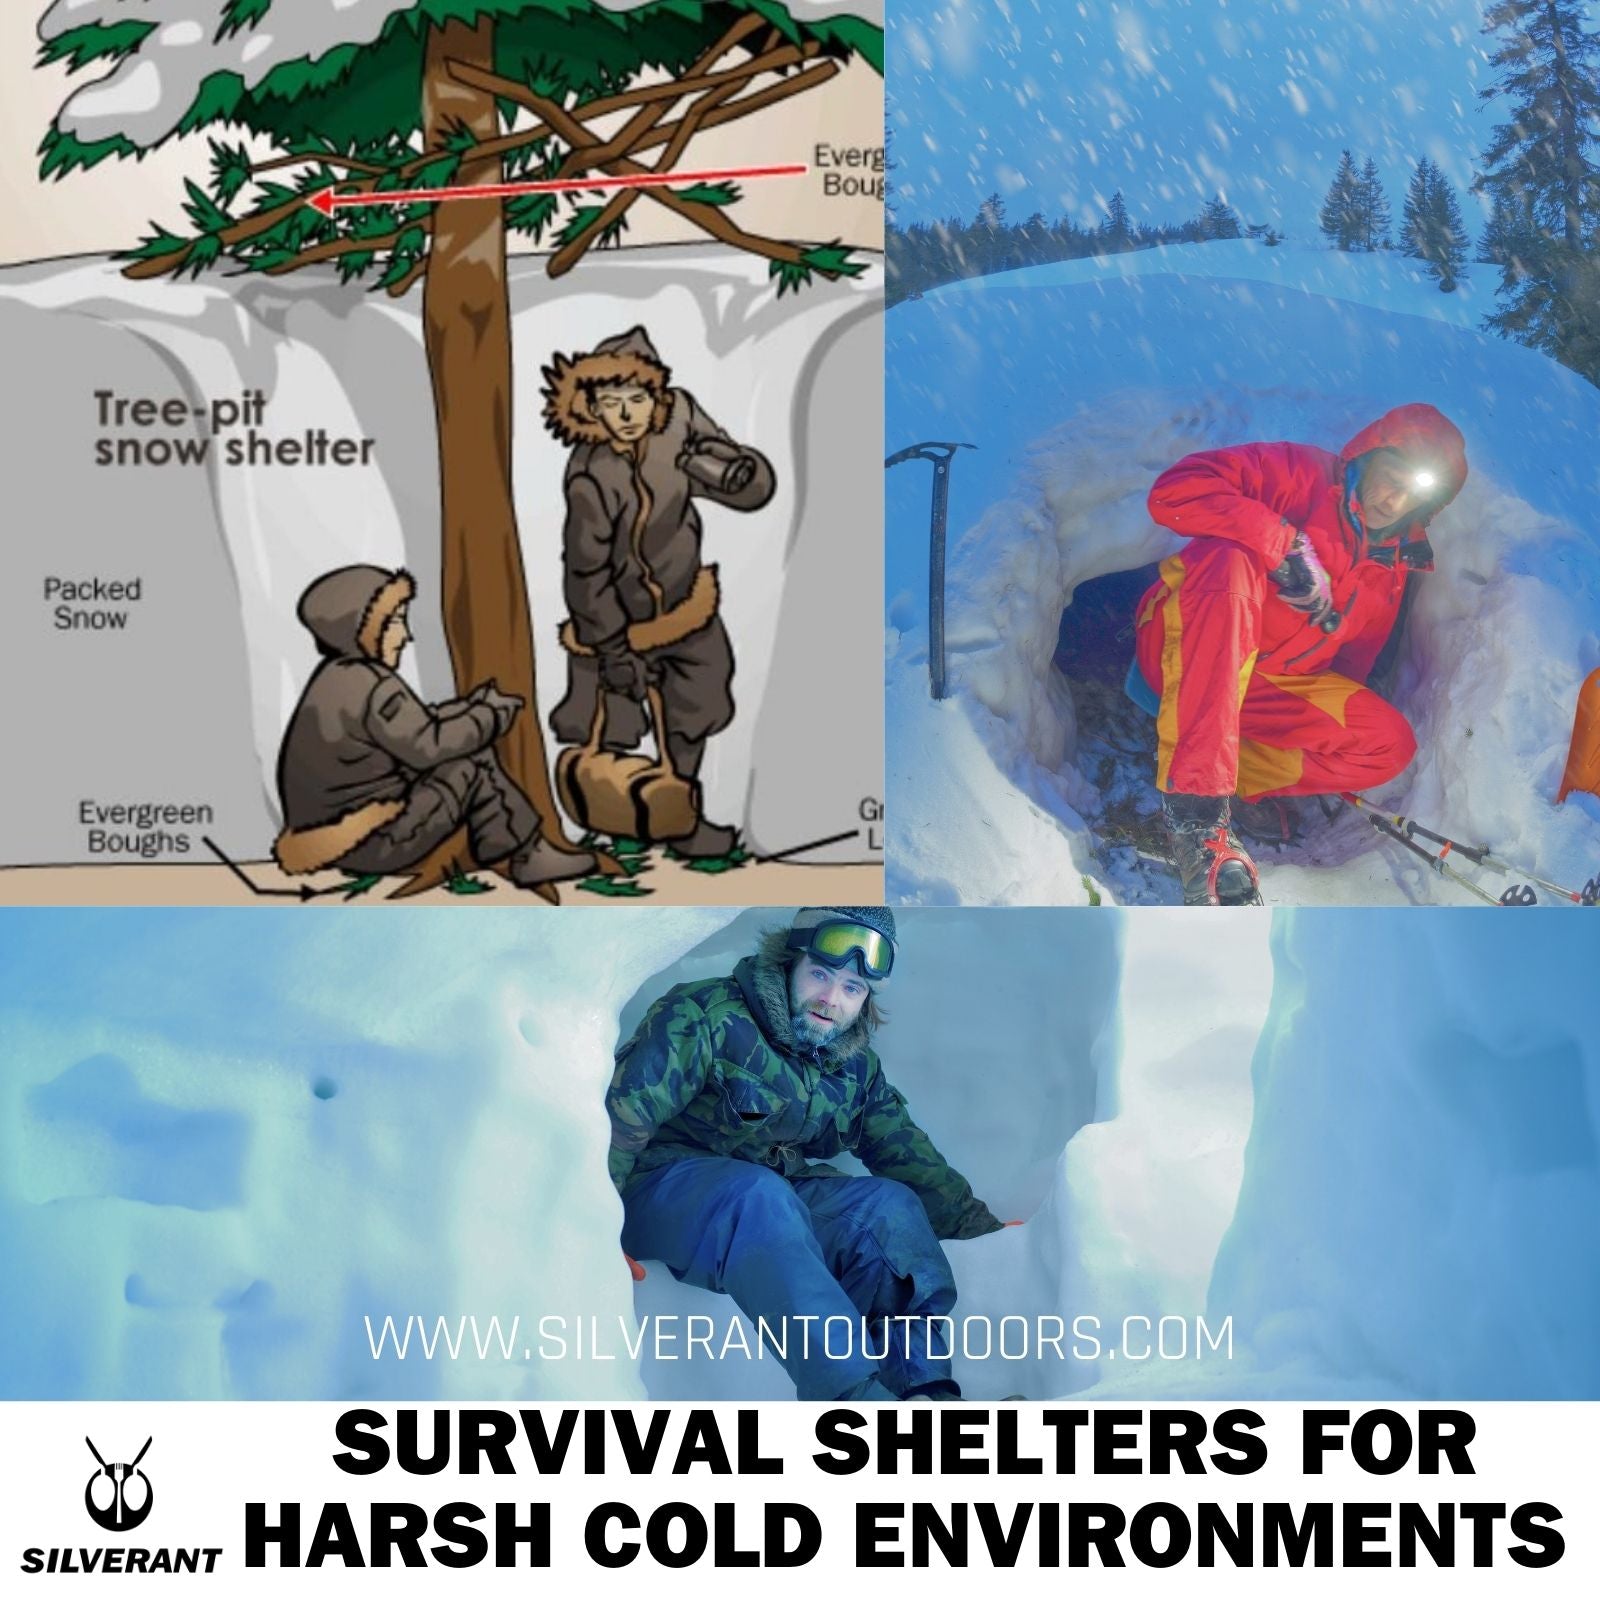 Survival Shelters for Harsh Cold Environments